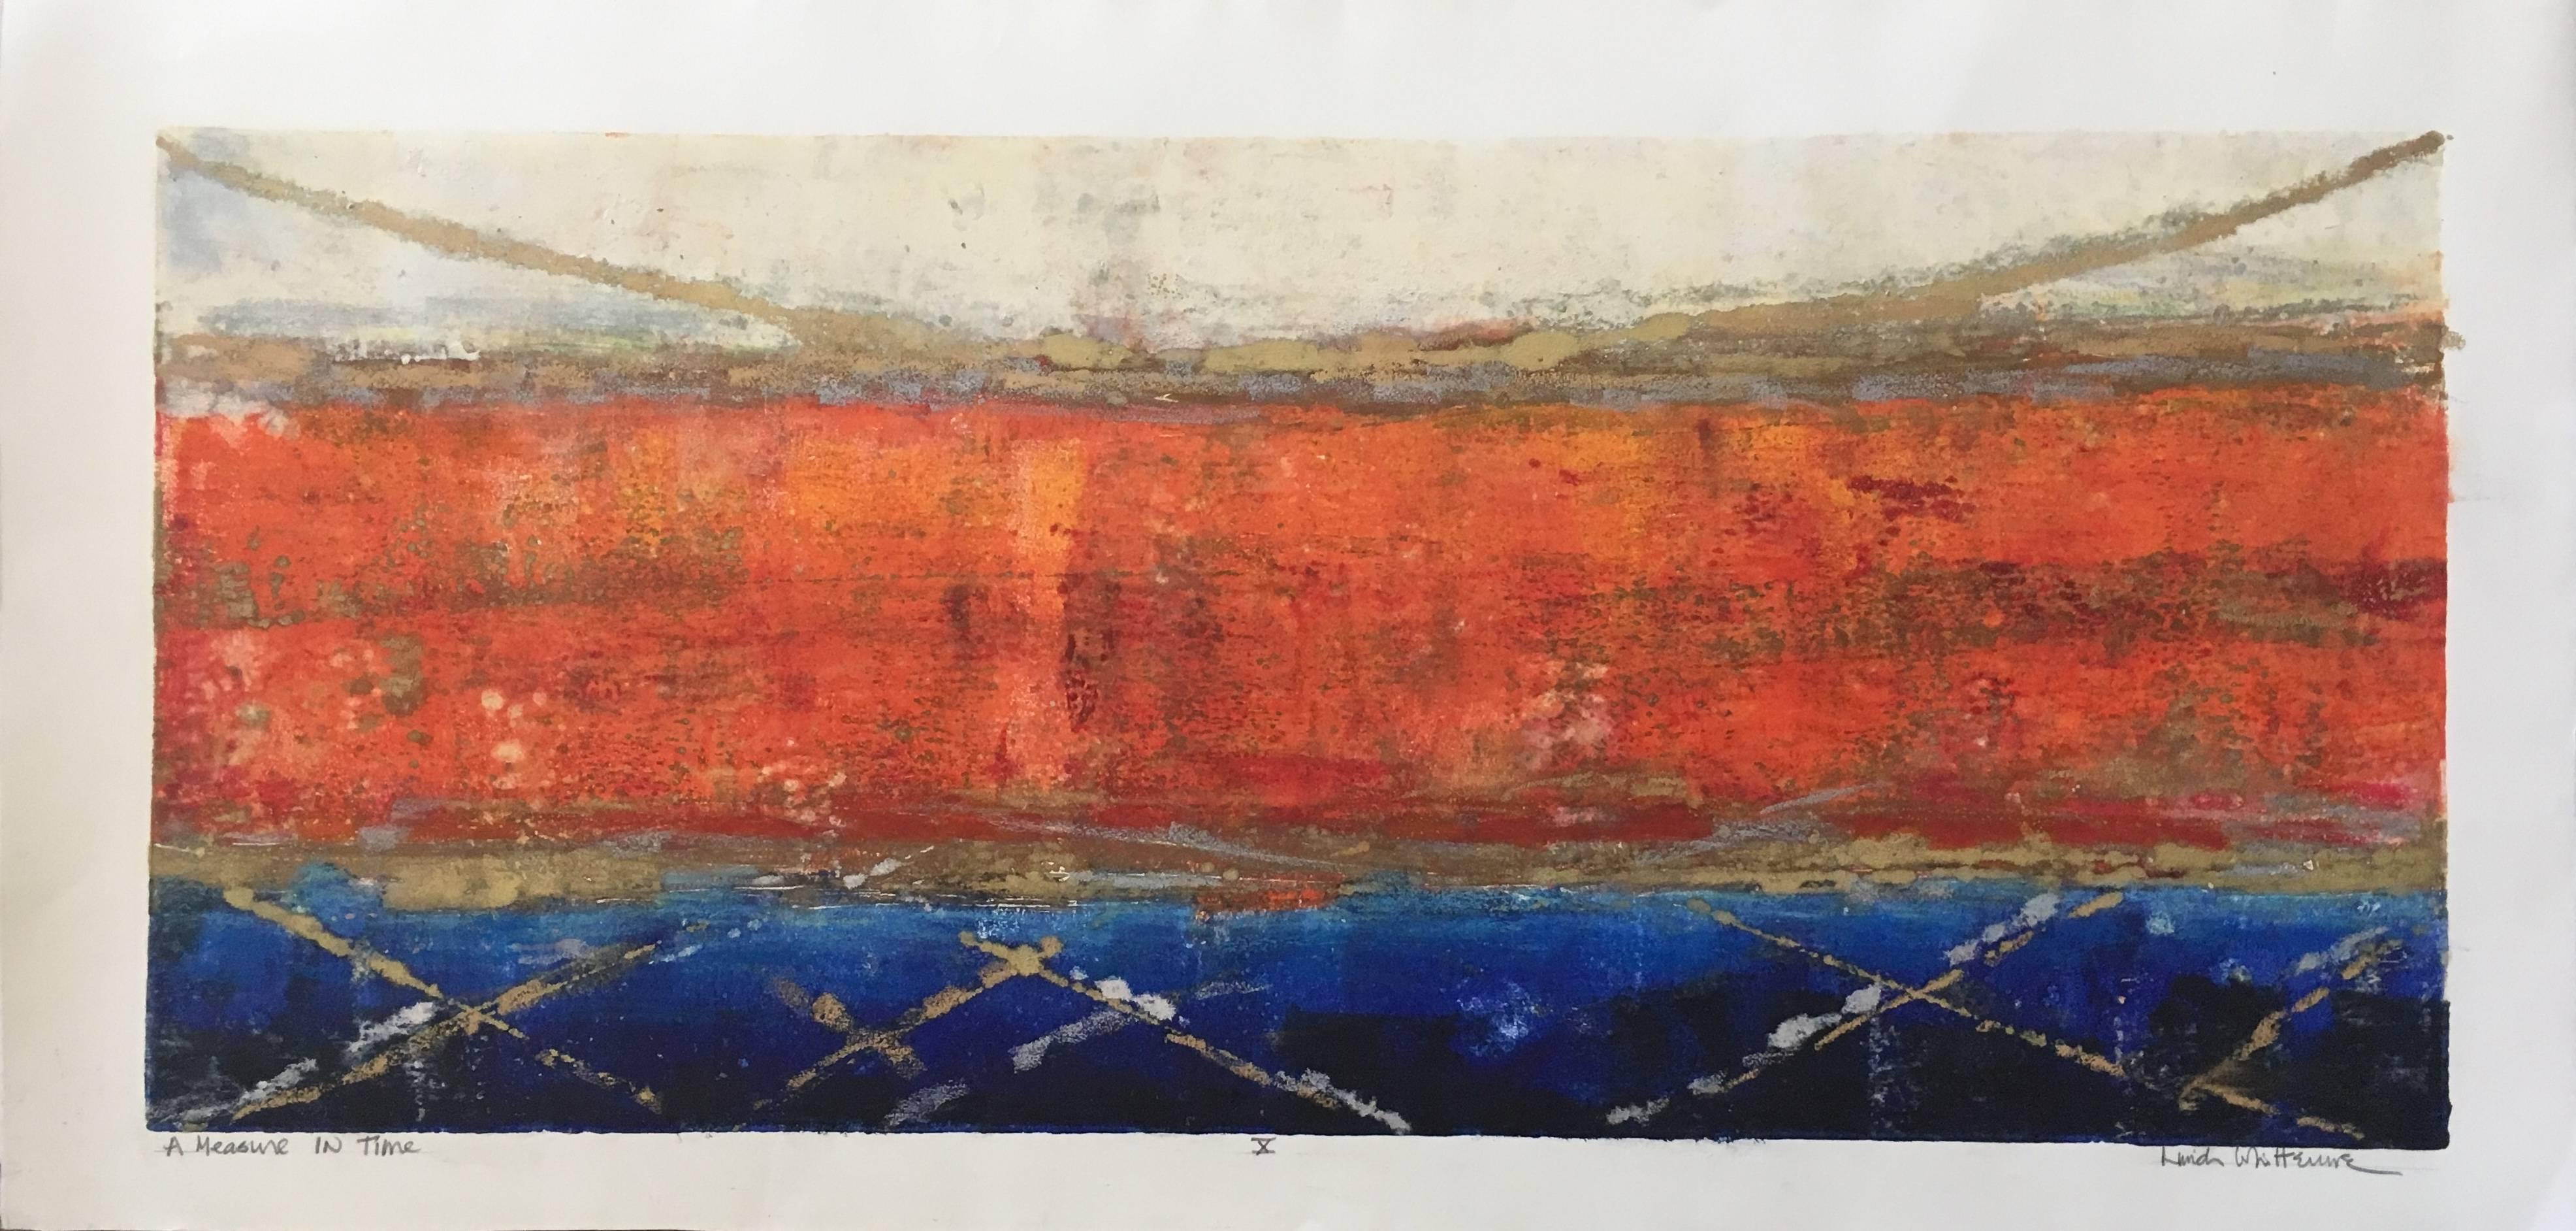 Bold reds, bold midnight blues, and sparkling accents play across this beautiful abstract original work "Measure In Time" by master print maker Linda Whittemore. This mixed media viscosity monotype displays all of the unique skill and painterly